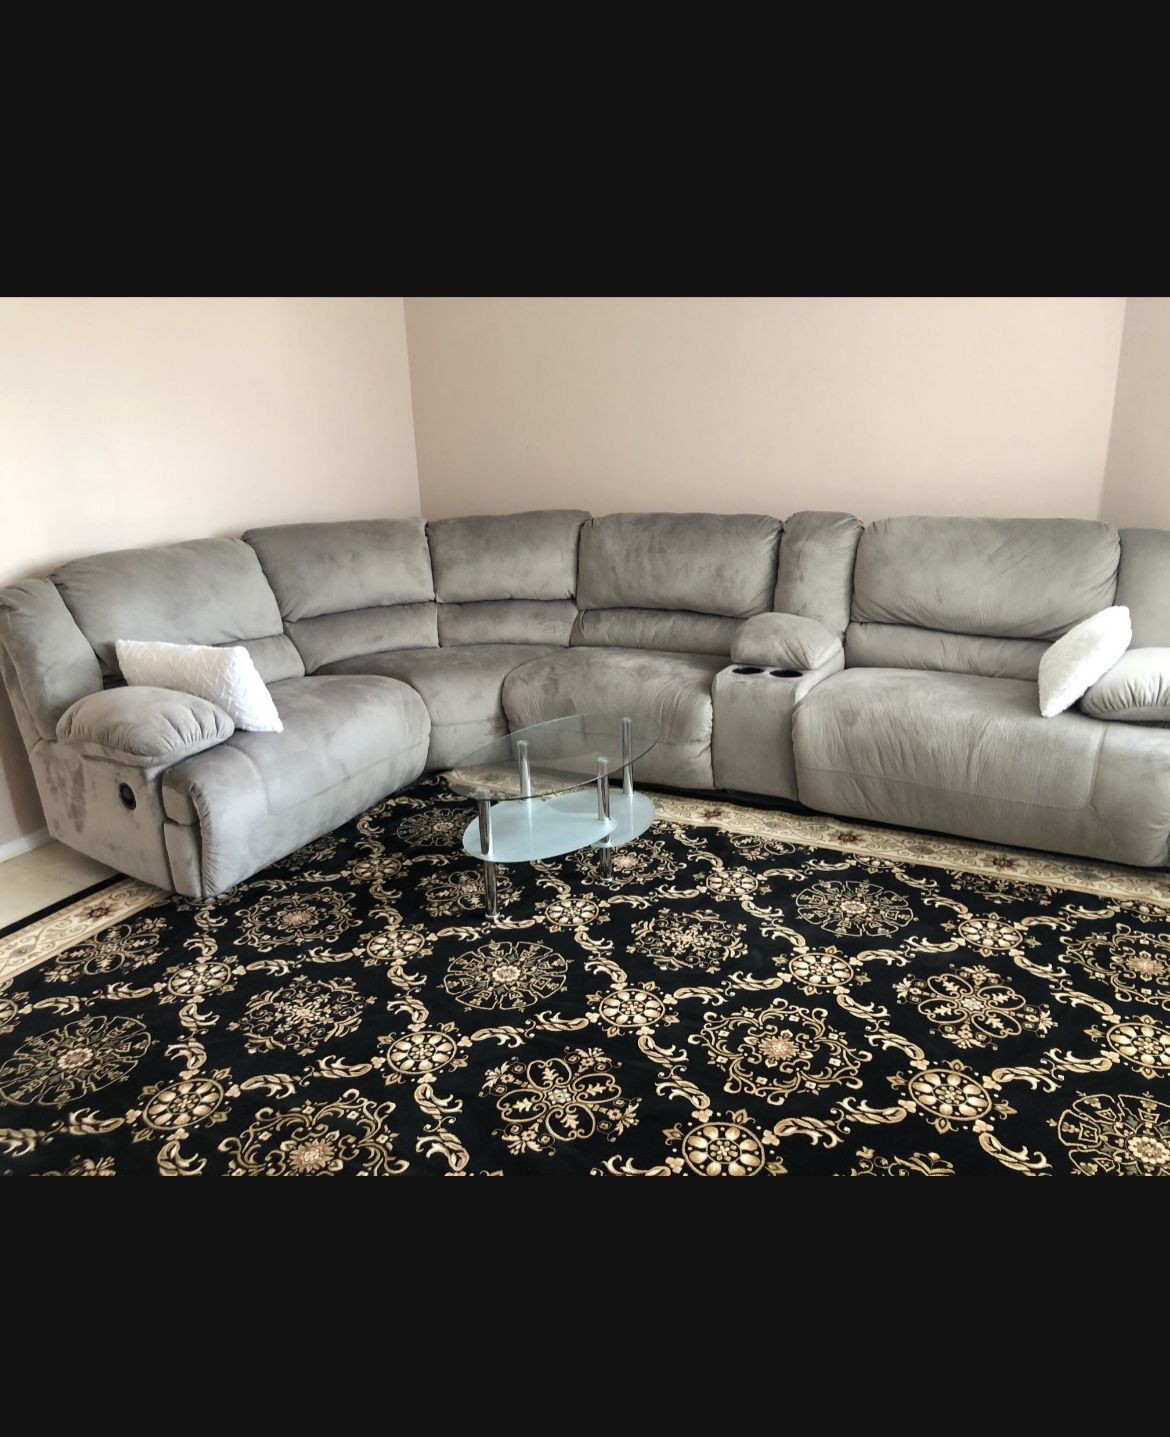 Beautiful Sectional Sofa with two Reclining chairs